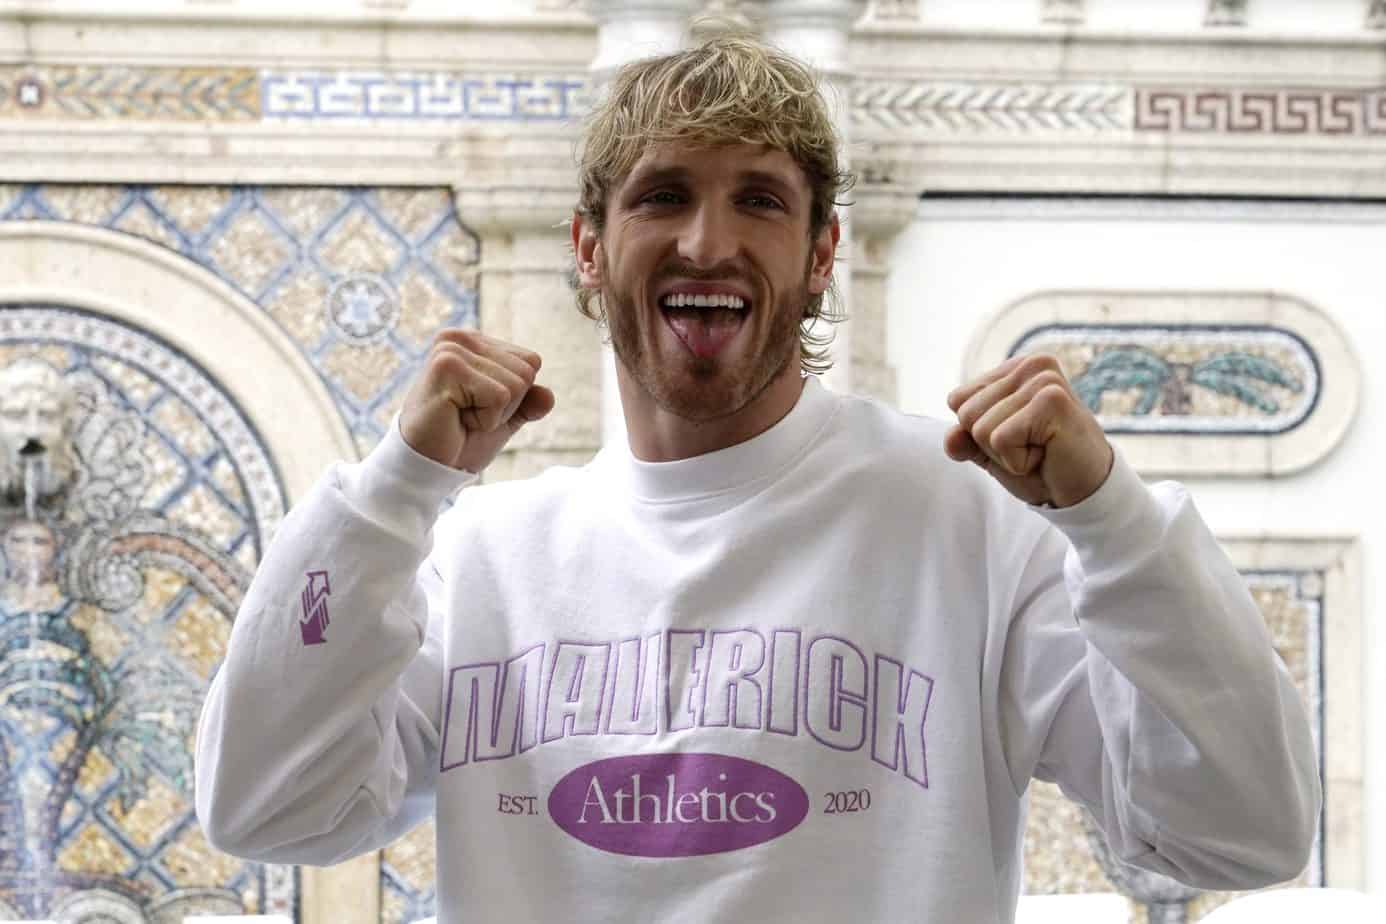 Logan Paul recently exposed that Floyd Mayweather has still not paid his end of the bargain from their fight over eight months ago while announcing lawsuit